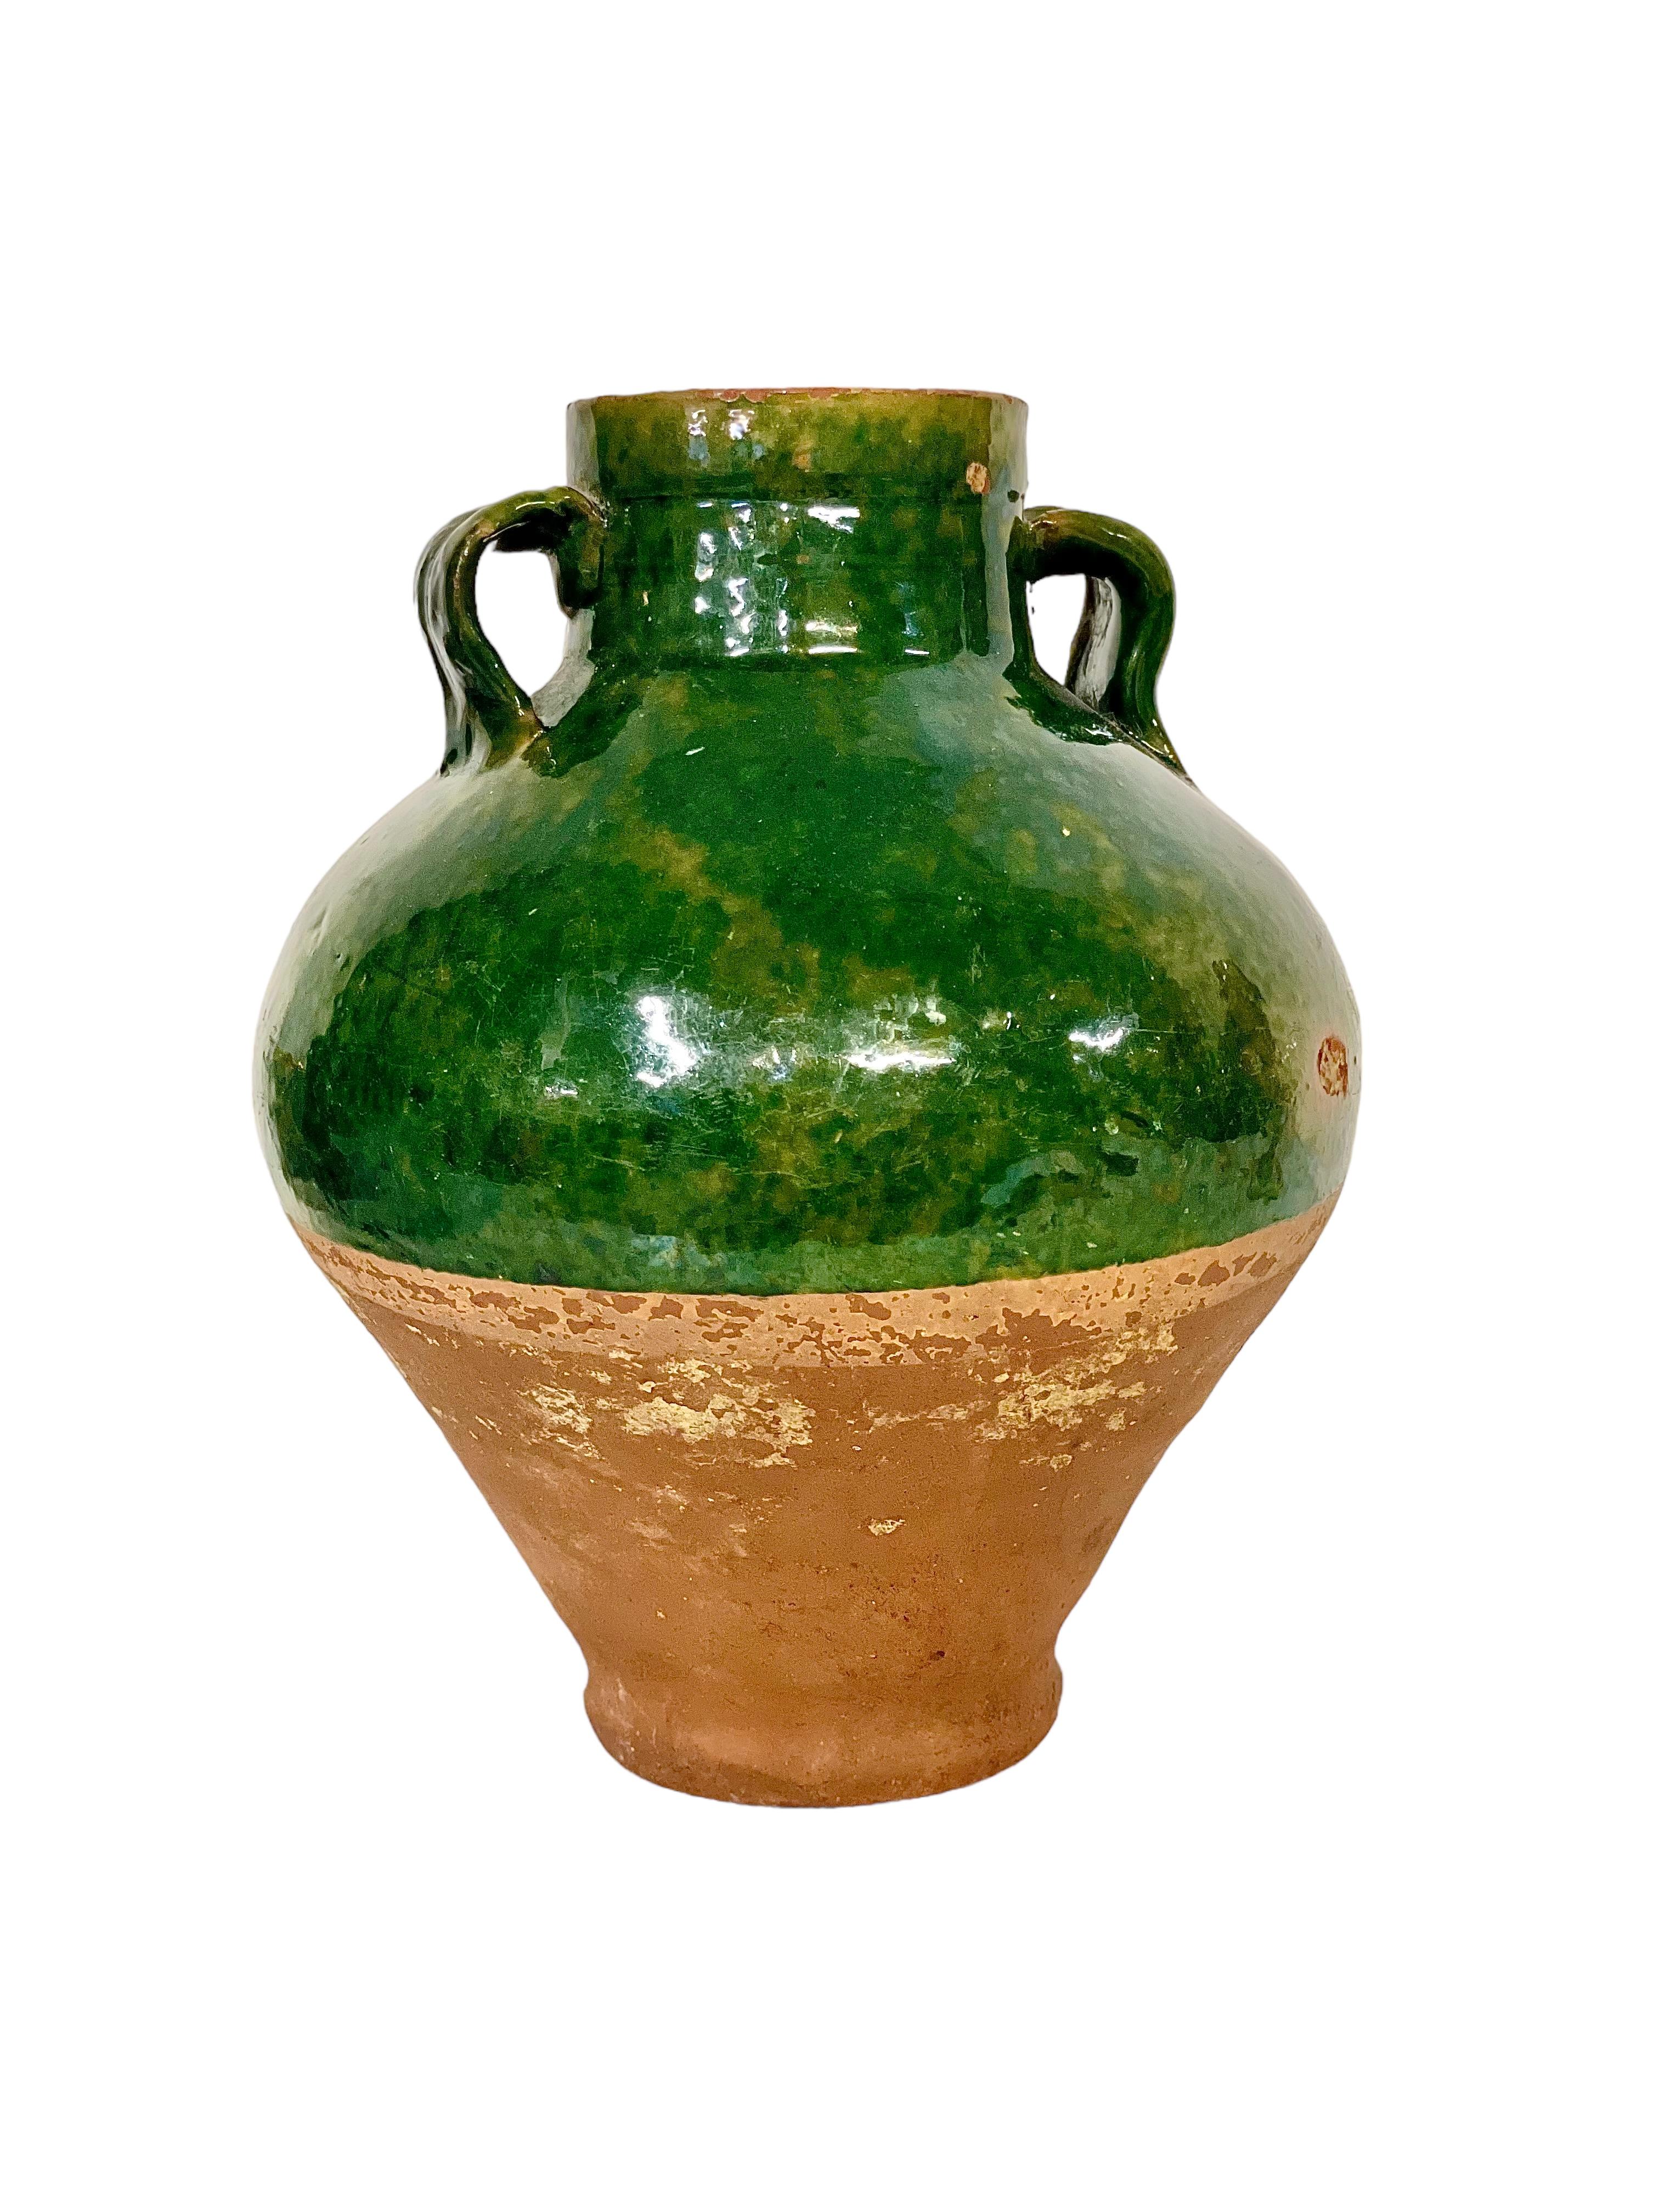 19th Century 19th C. Terracotta Olive Oil Jar with Two Handles For Sale